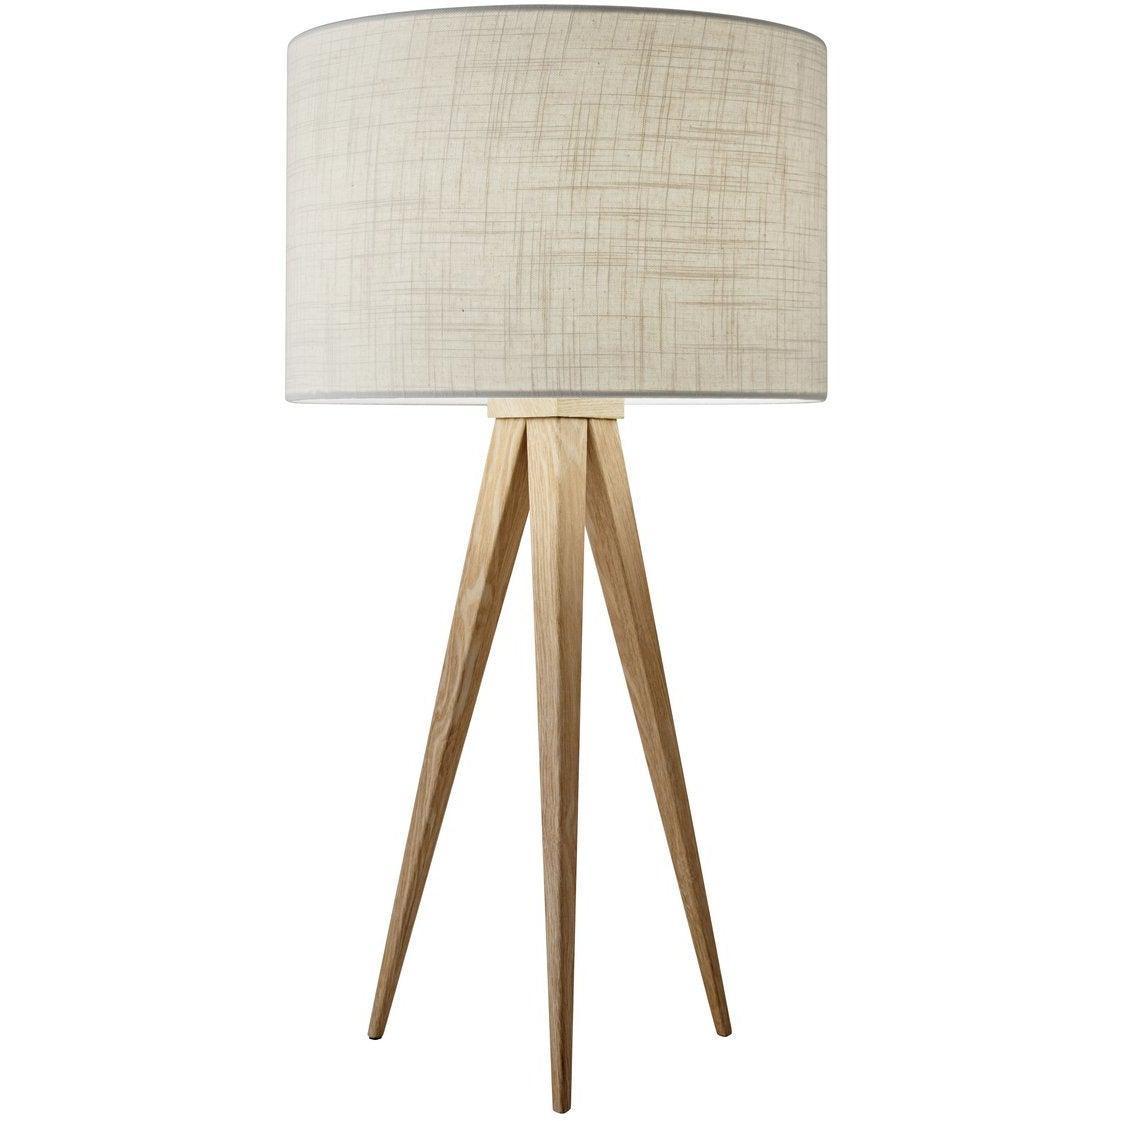 Adesso Home - Director Table Lamp - 6423-12 | Montreal Lighting & Hardware